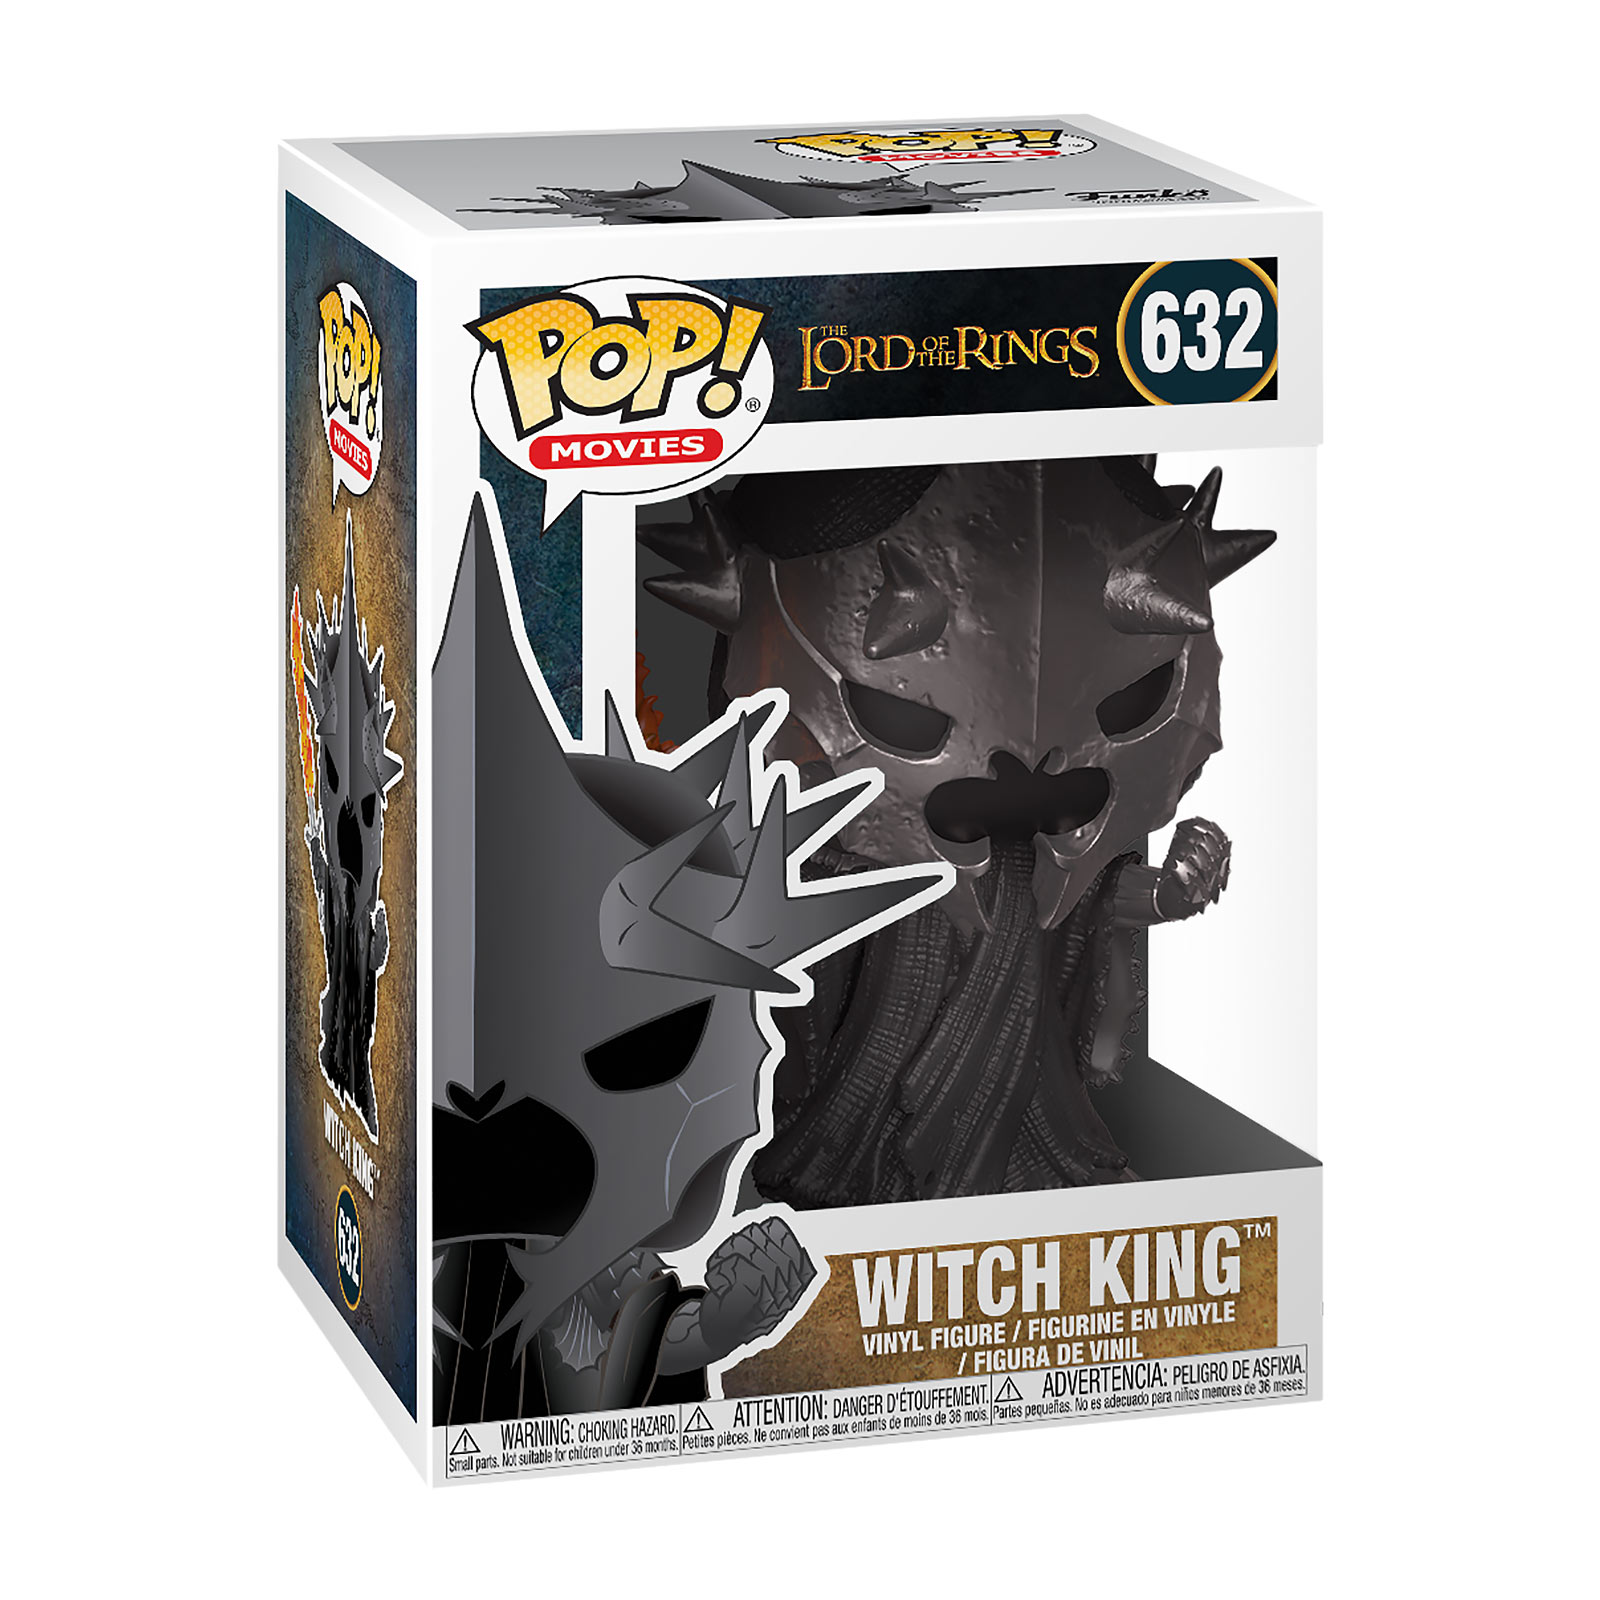 Lord of the Rings - Witch King of Angmar Funko Pop Figurine